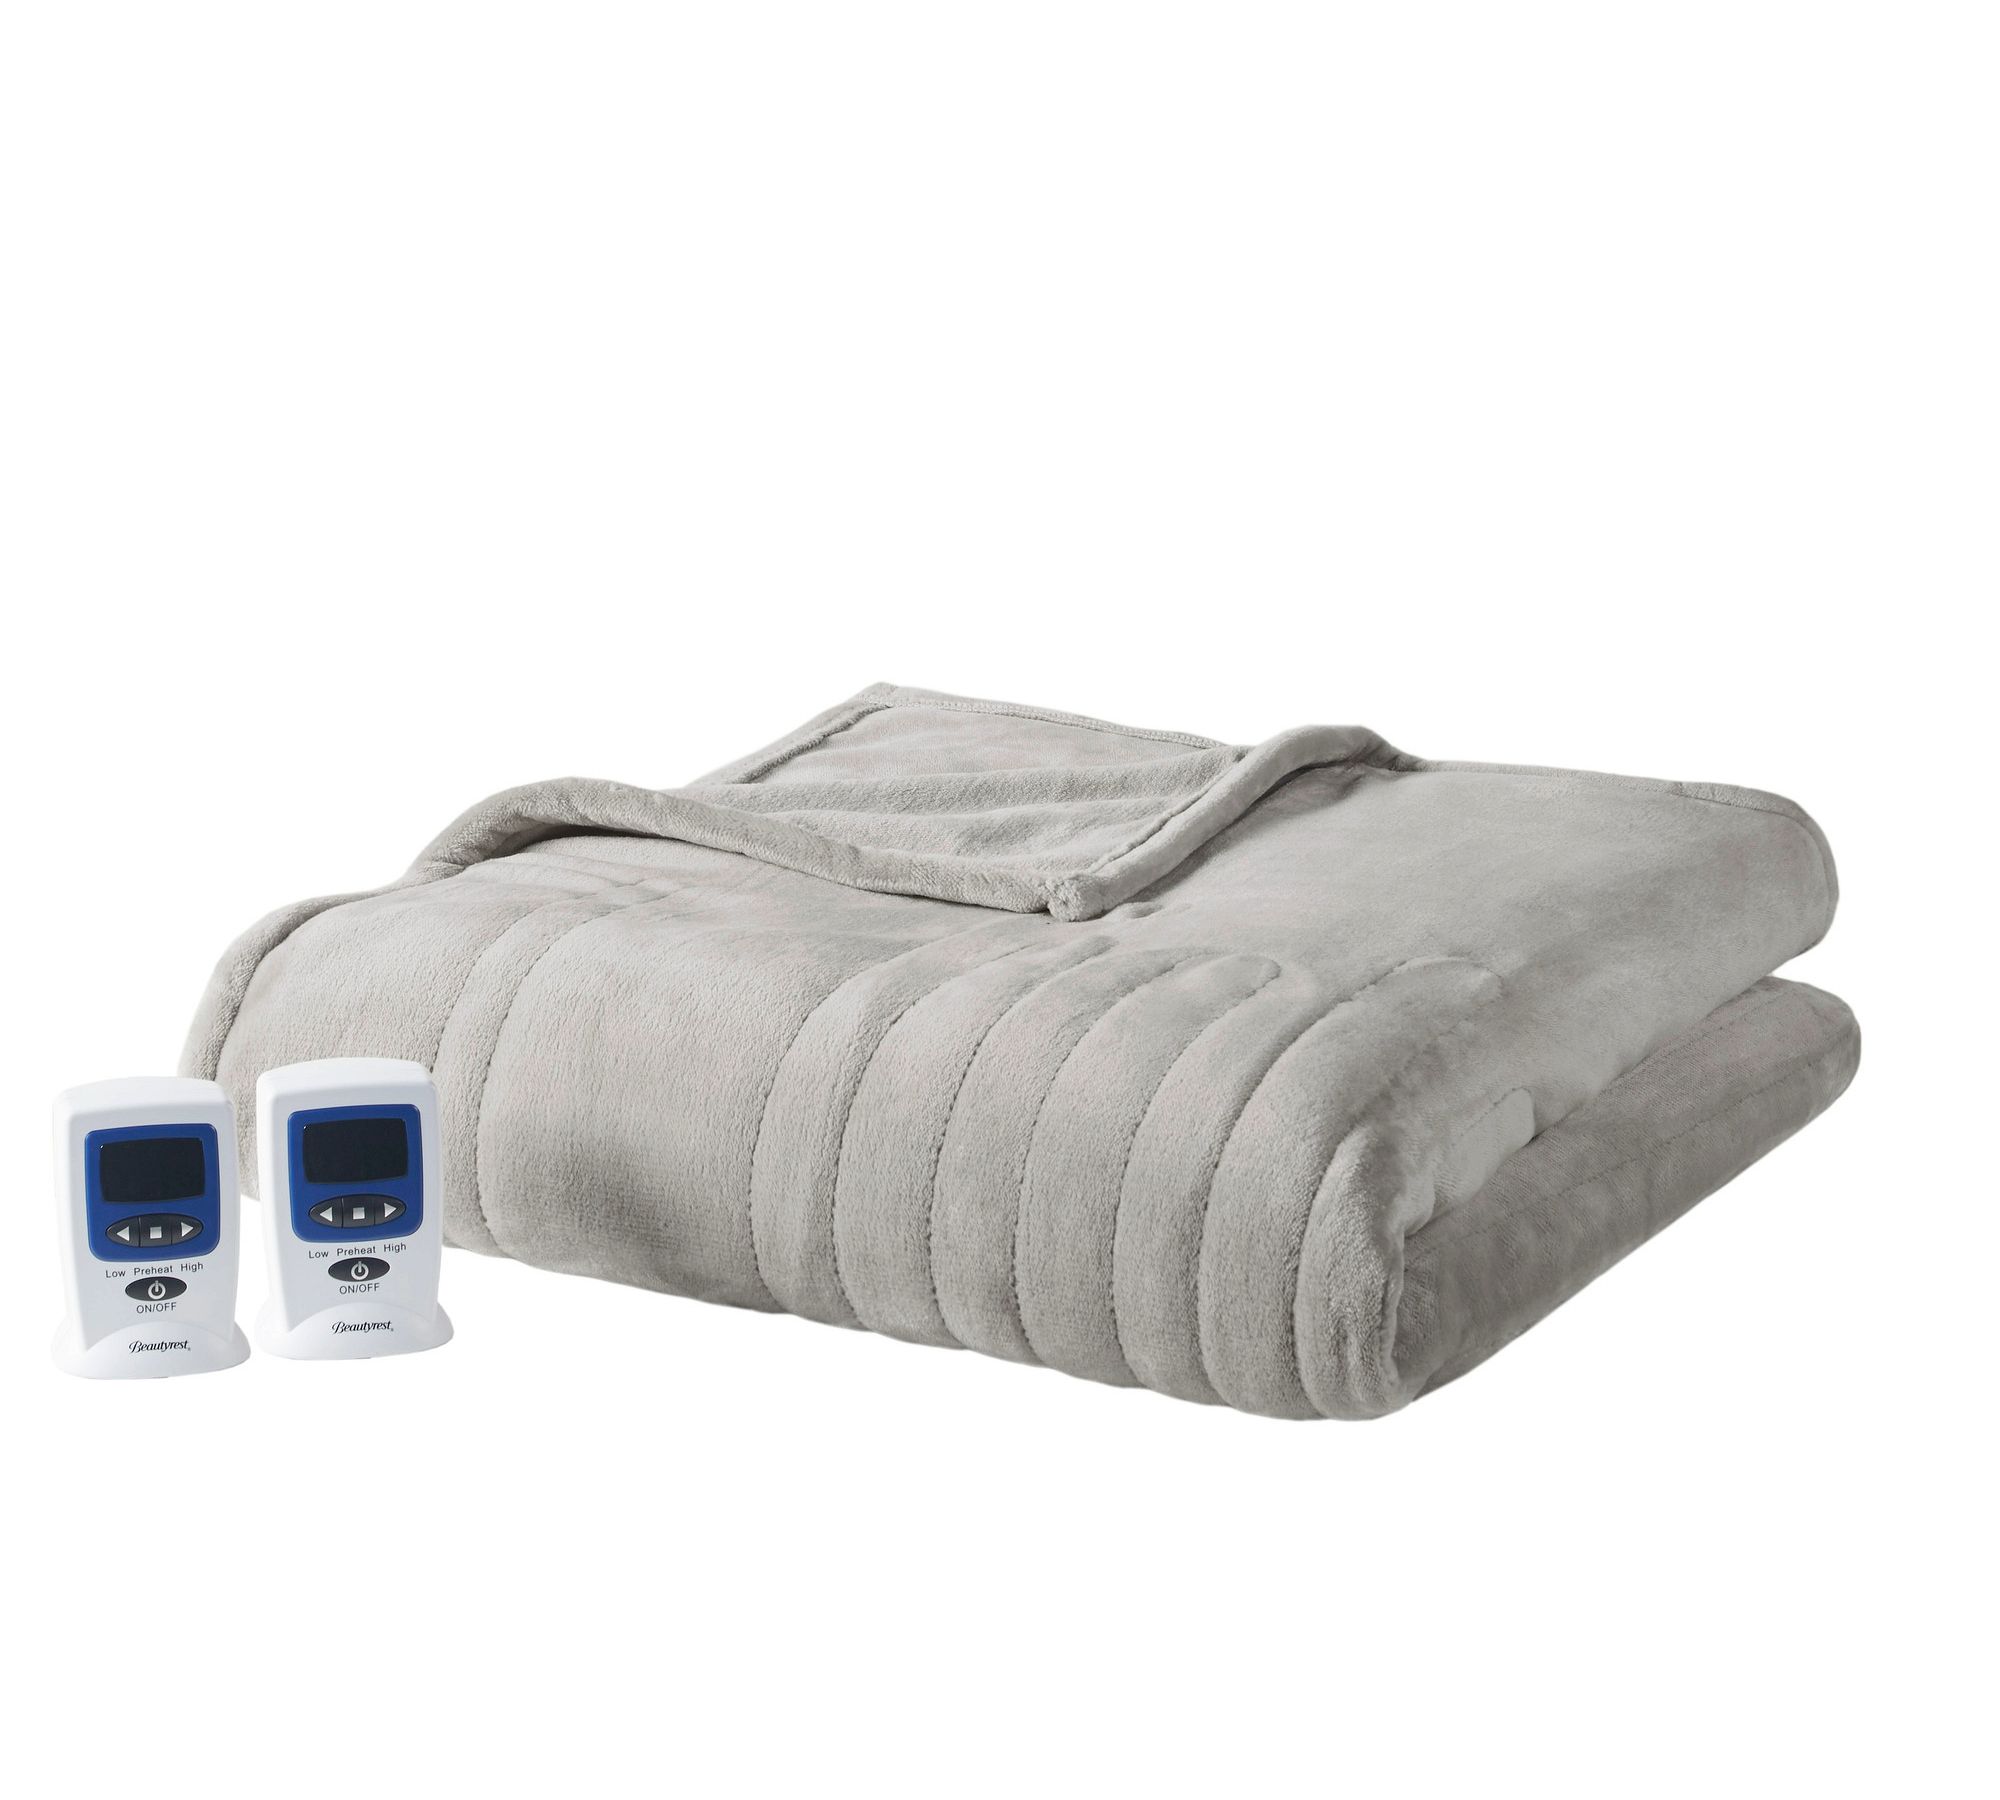 Beautyrest Microplush Heated Electric Blanket With Wifi Technology